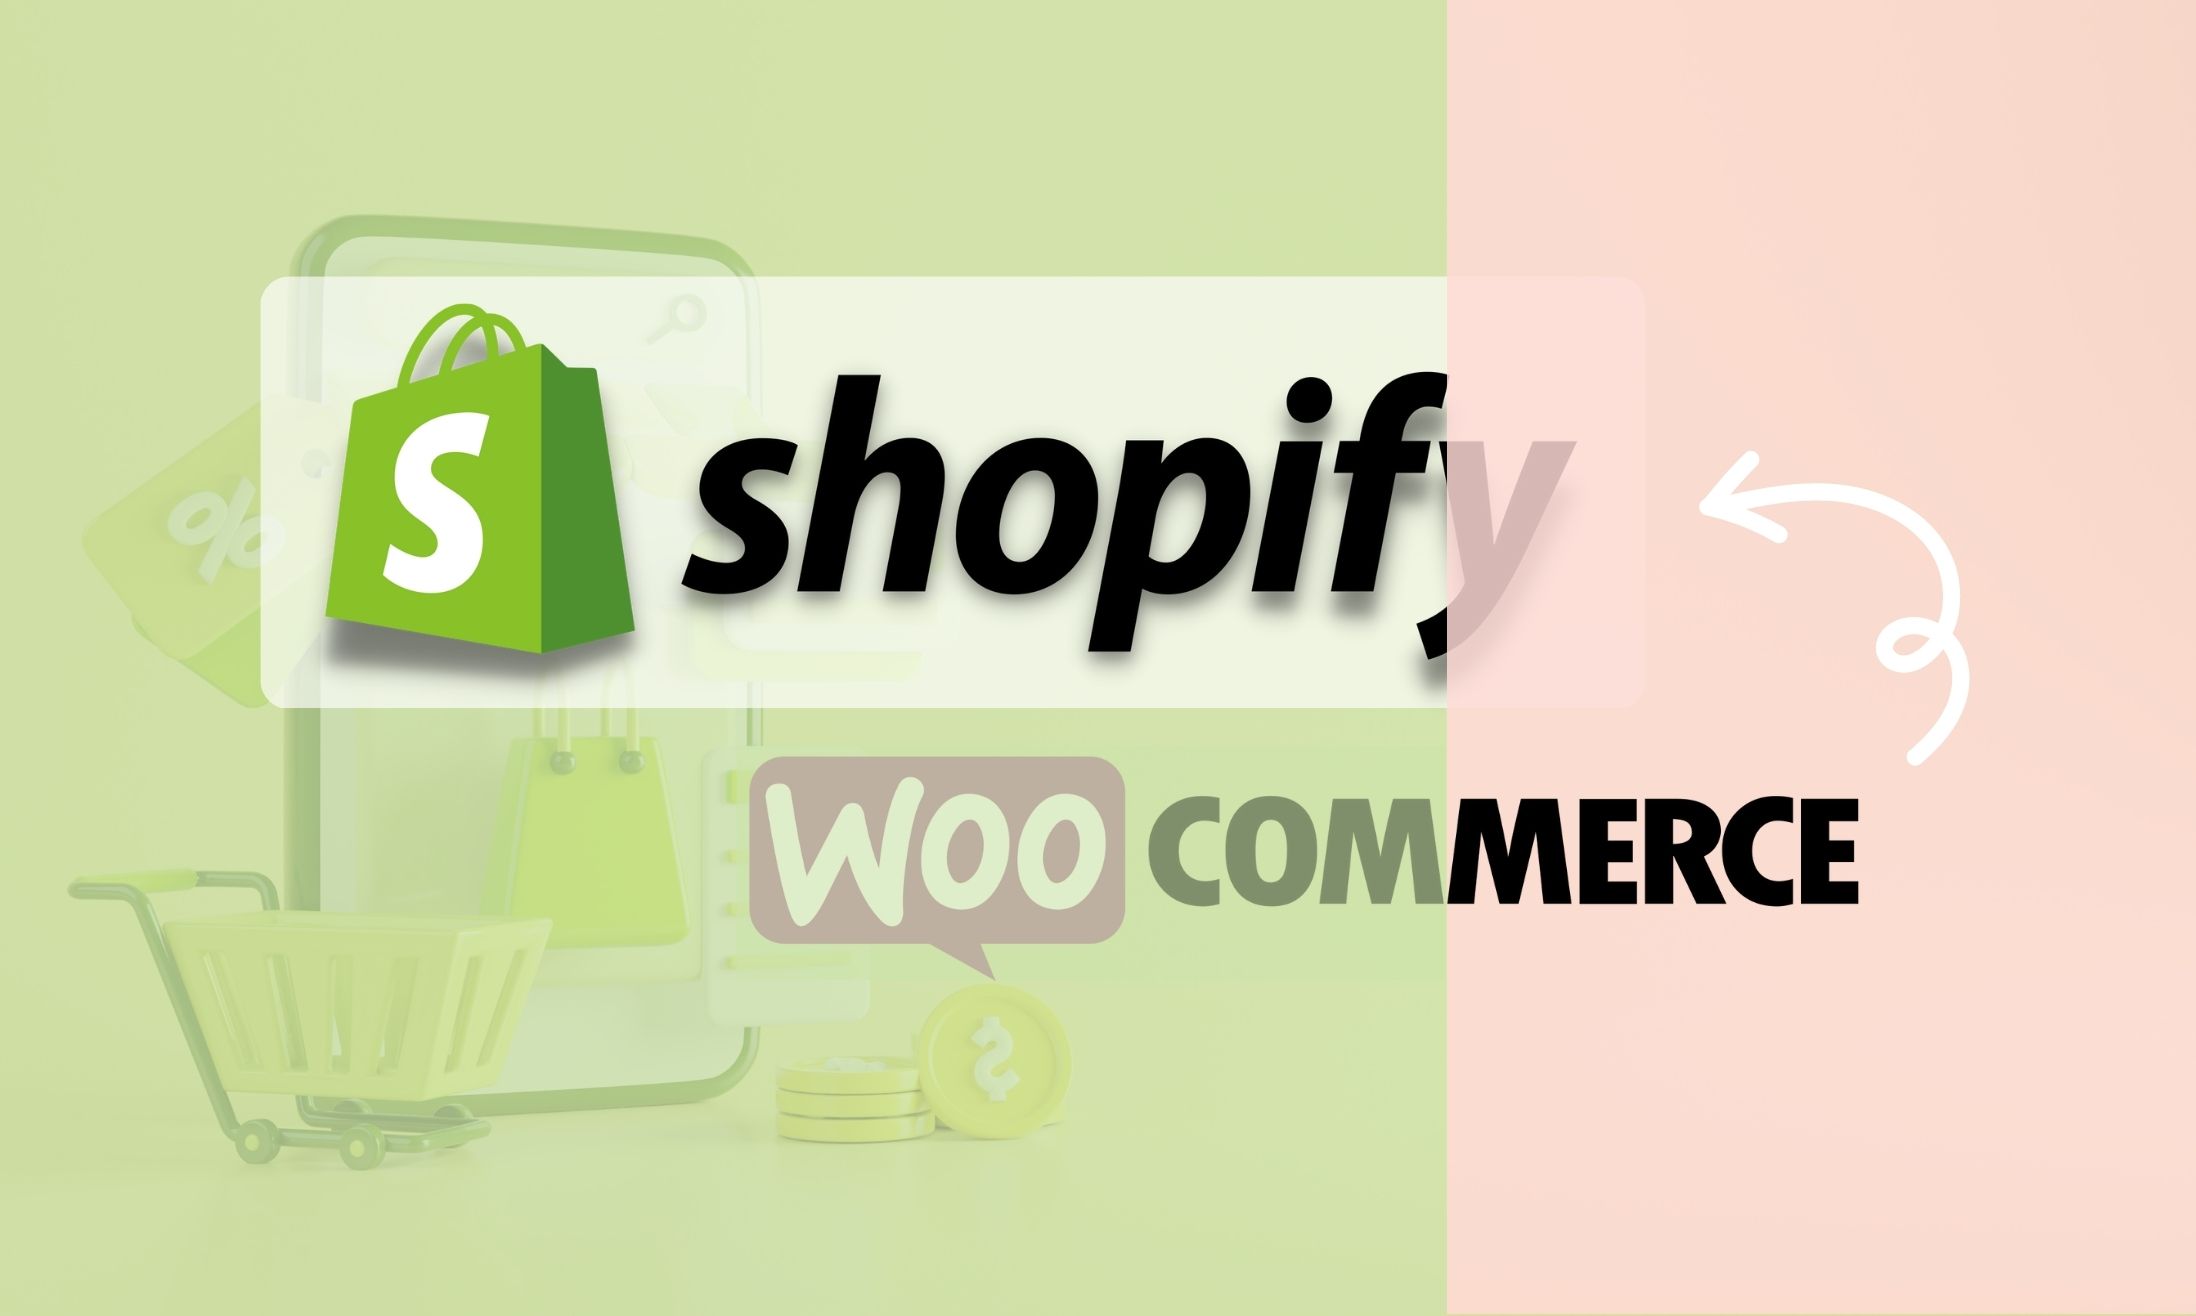 migrate products from woocommerce to shopify